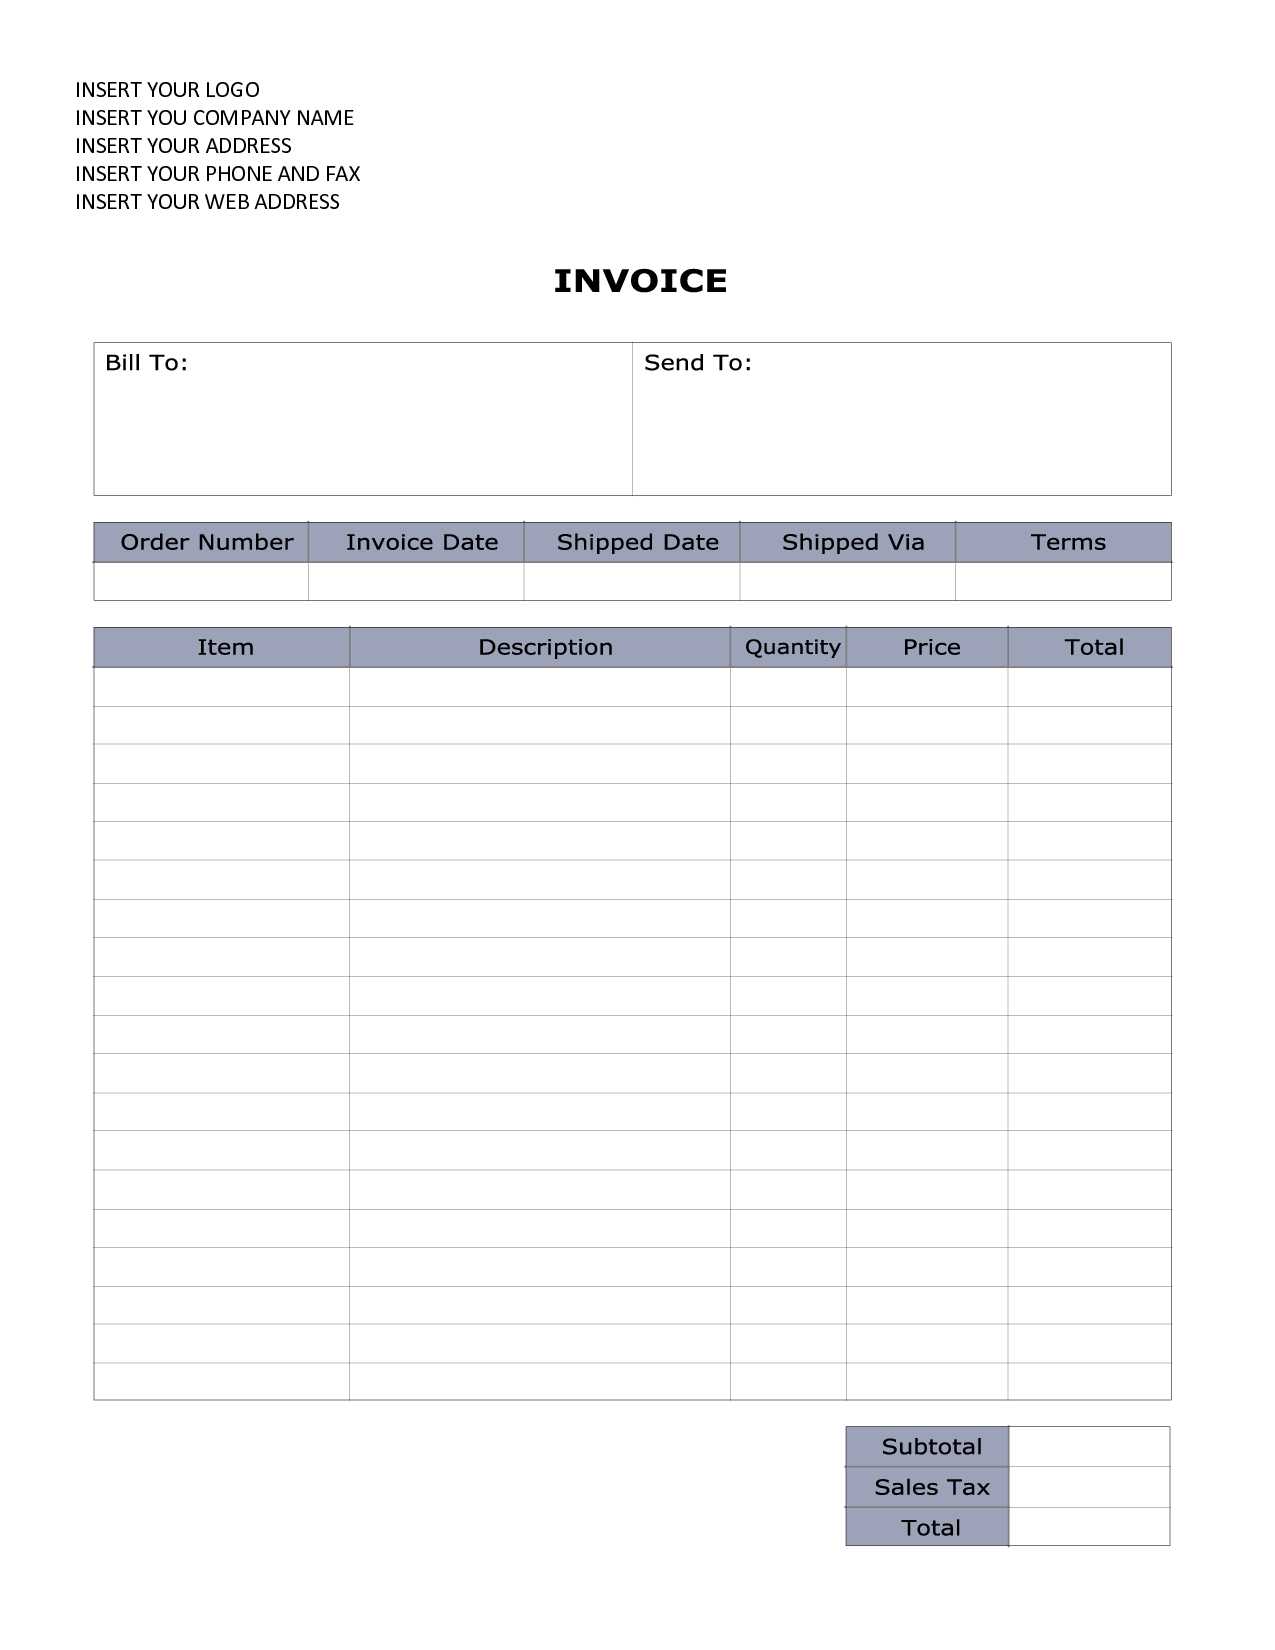 Printable Invoice Template Ms Word | Invoice Example Regarding Invoice Template Word 2010